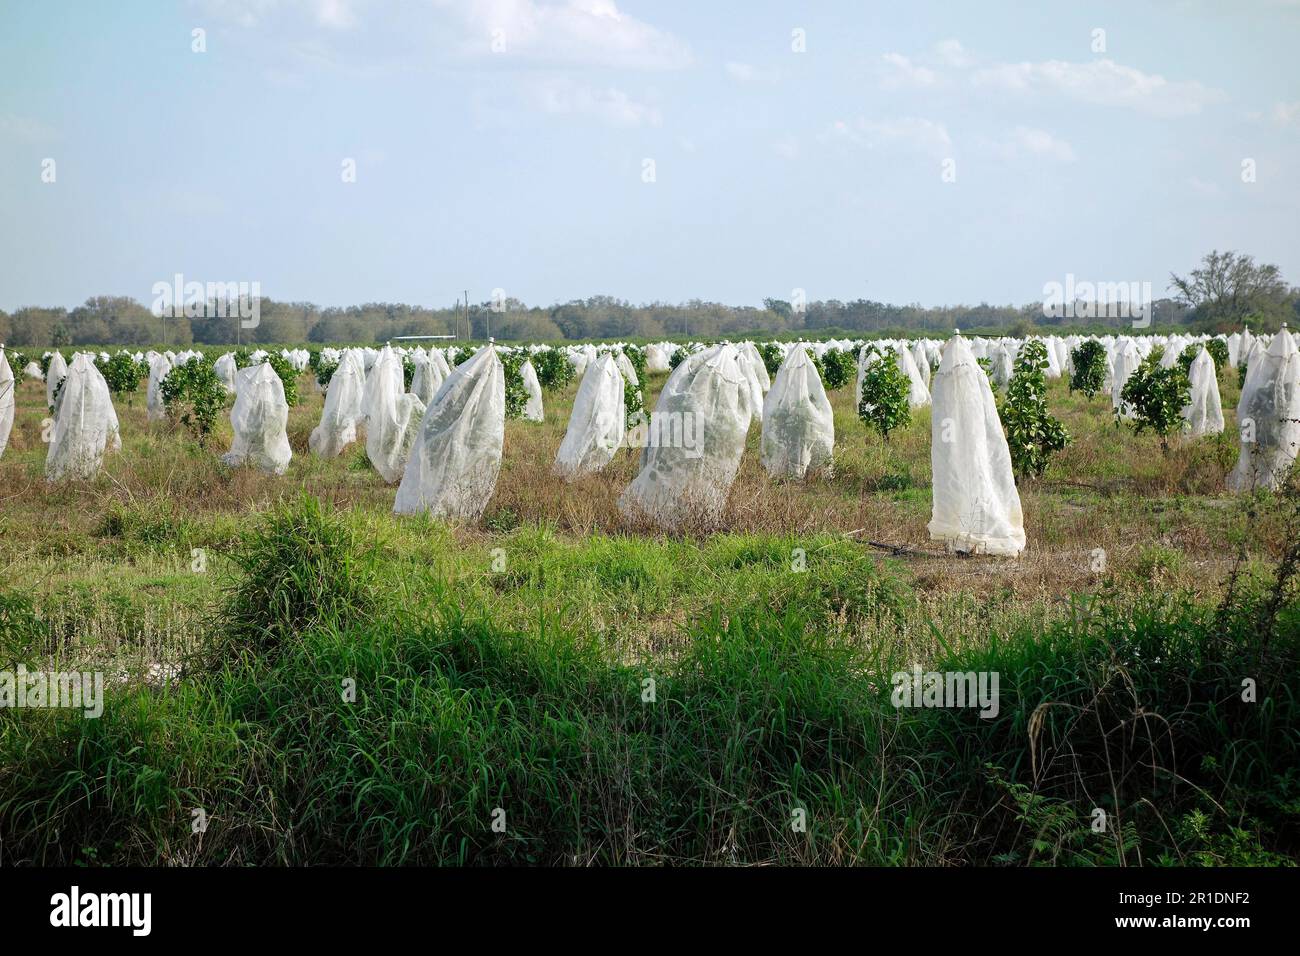 orange trees in florida covered with insect netting exclosures Stock Photo